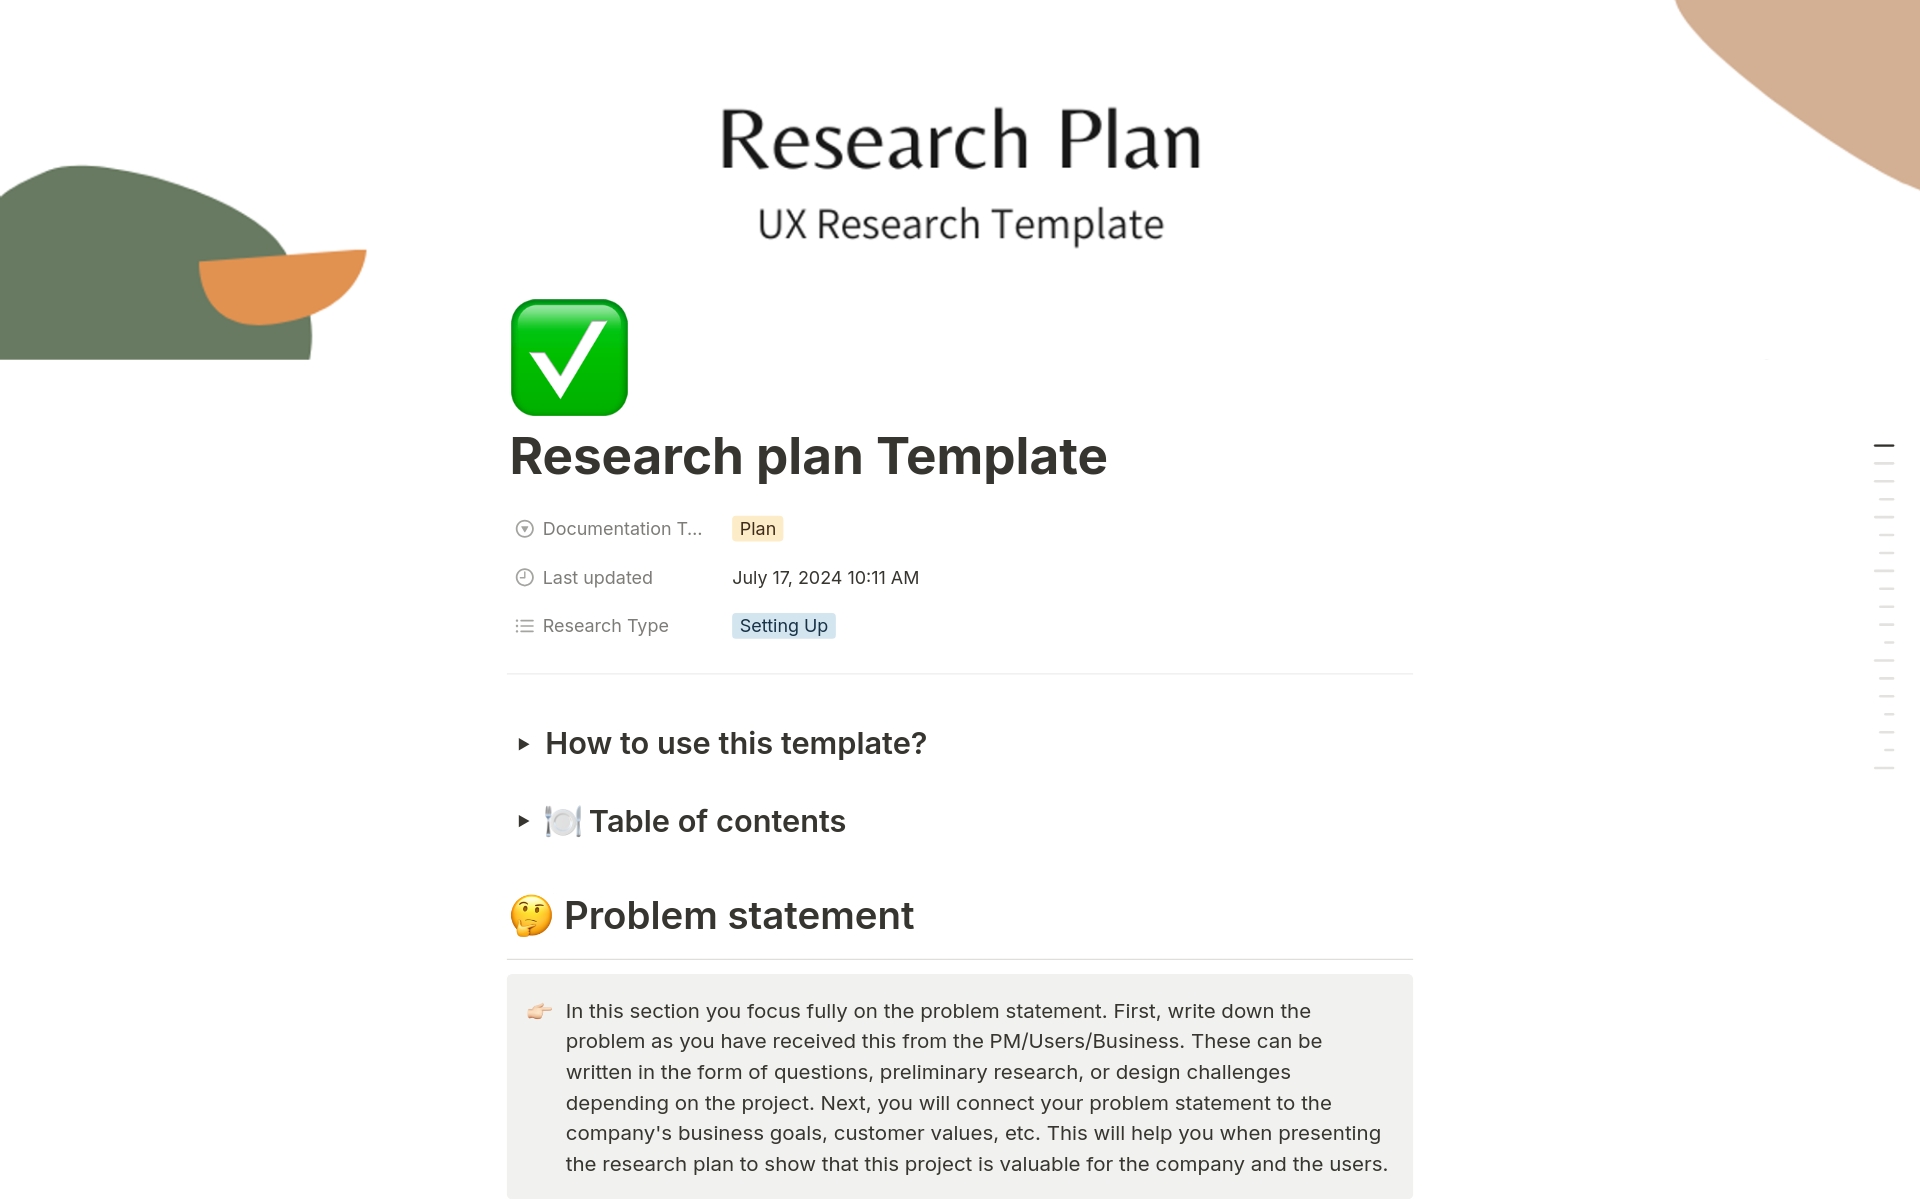 This is a template for a research plan, you can use this when research is requested to help you organise and plan out your research.